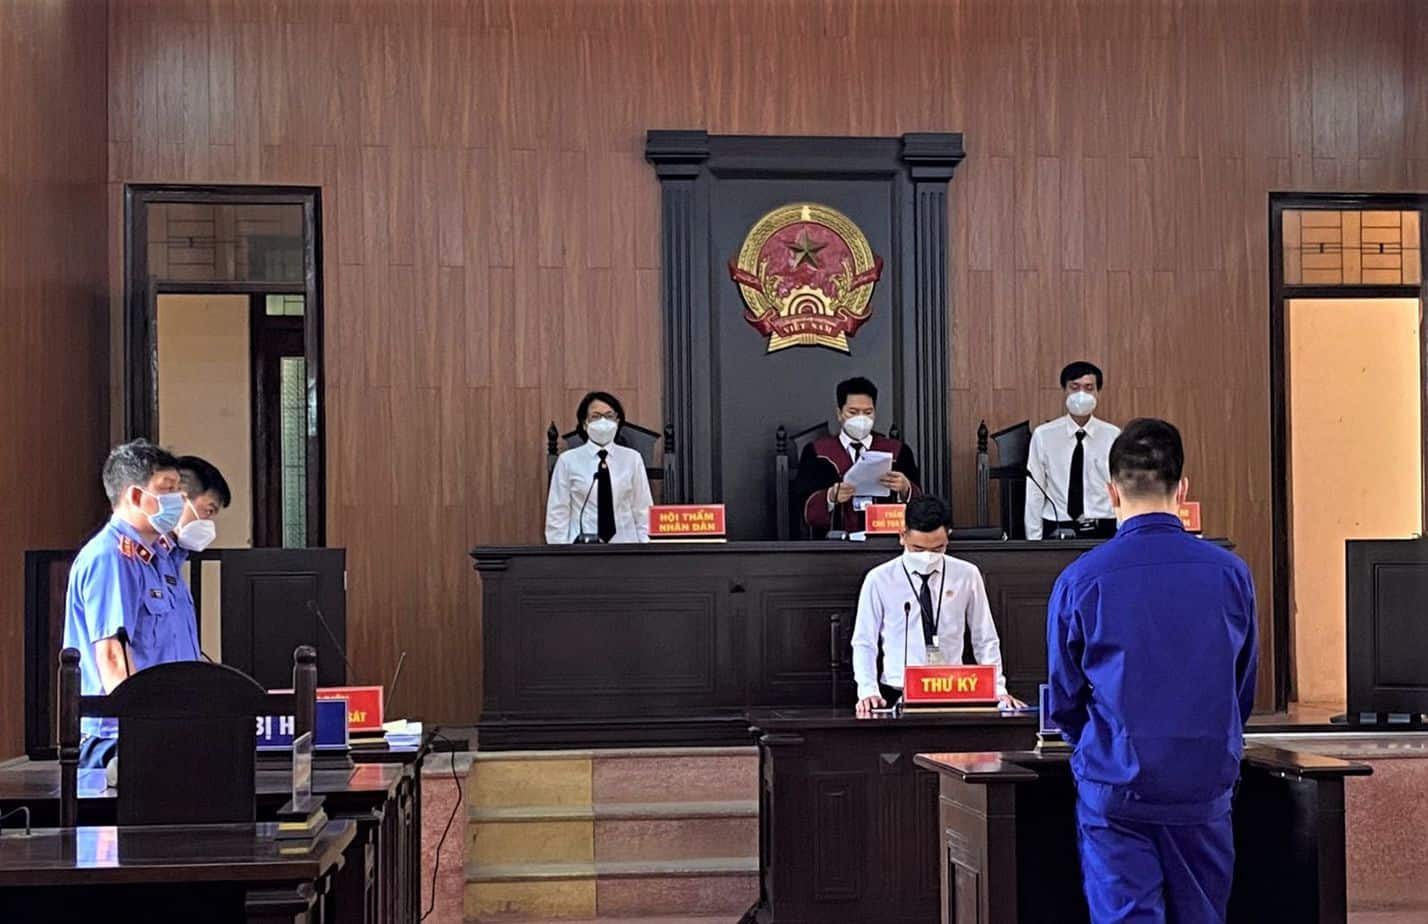 Appellate trial in the field of legal proceedings under the law in Vietnam